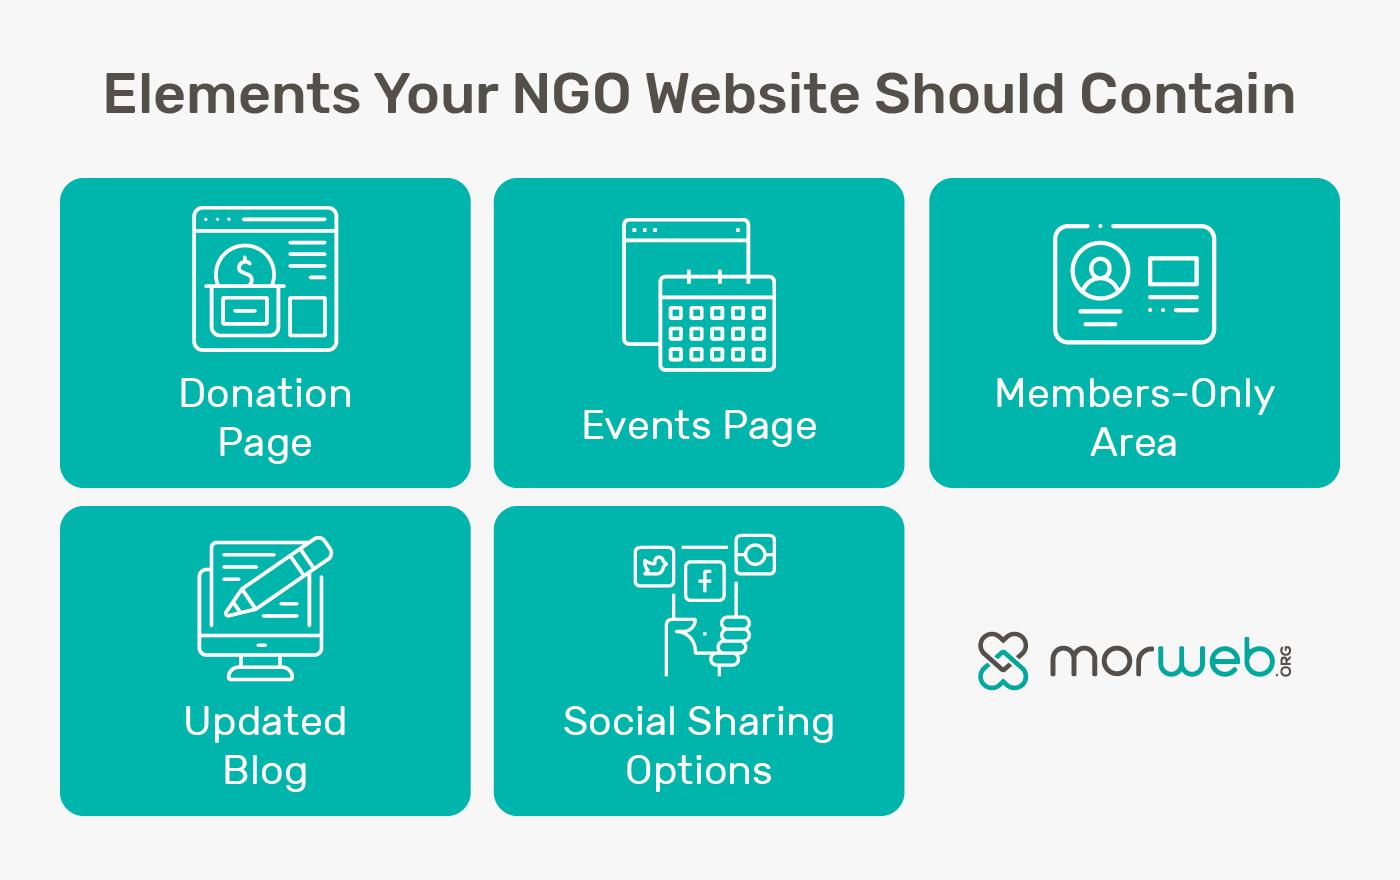 Visual representation of certain pages and elements that an NGO website should contain, also covered in the text below.